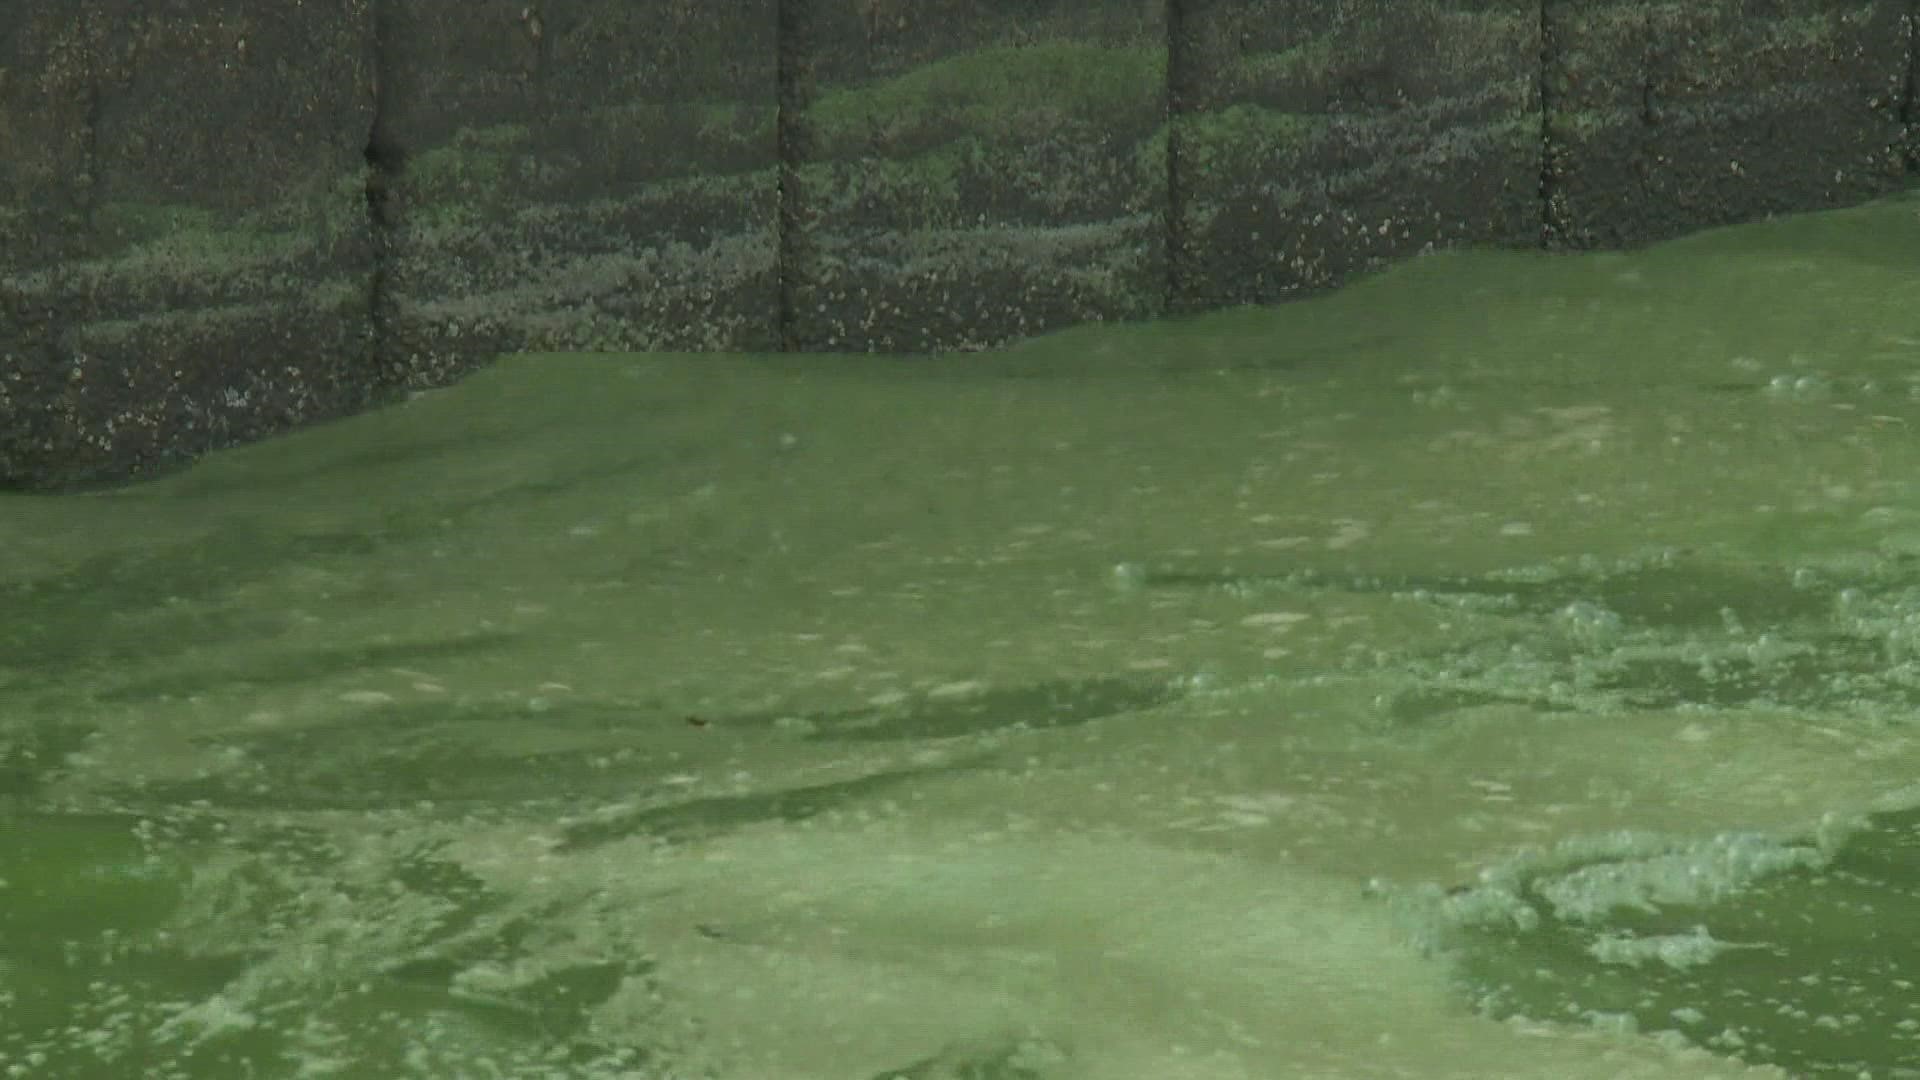 Louisiana Wildlife and Fisheries are trying to figure out what is the cause of the recent algae bloom in Lake Pontchartrain.